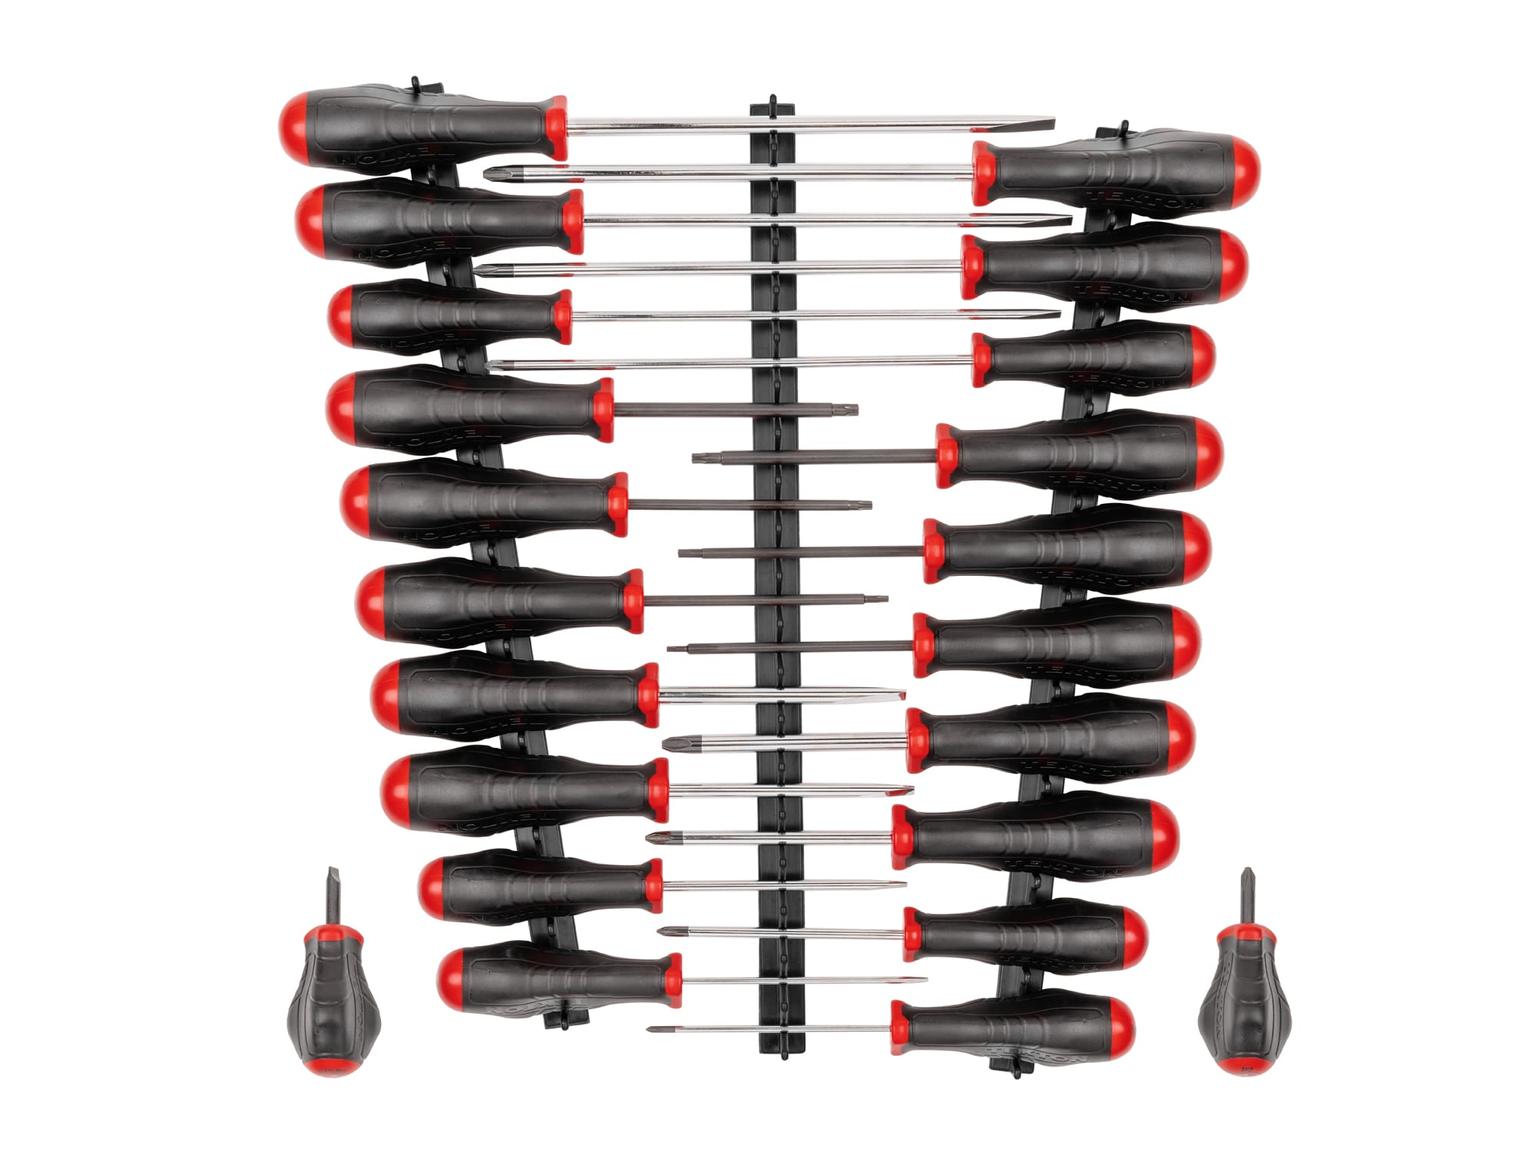 High-Torque Screwdriver Set with Black Rails, 22-Piece (#0-#3, 1/8-5/16 in., T10-T30)